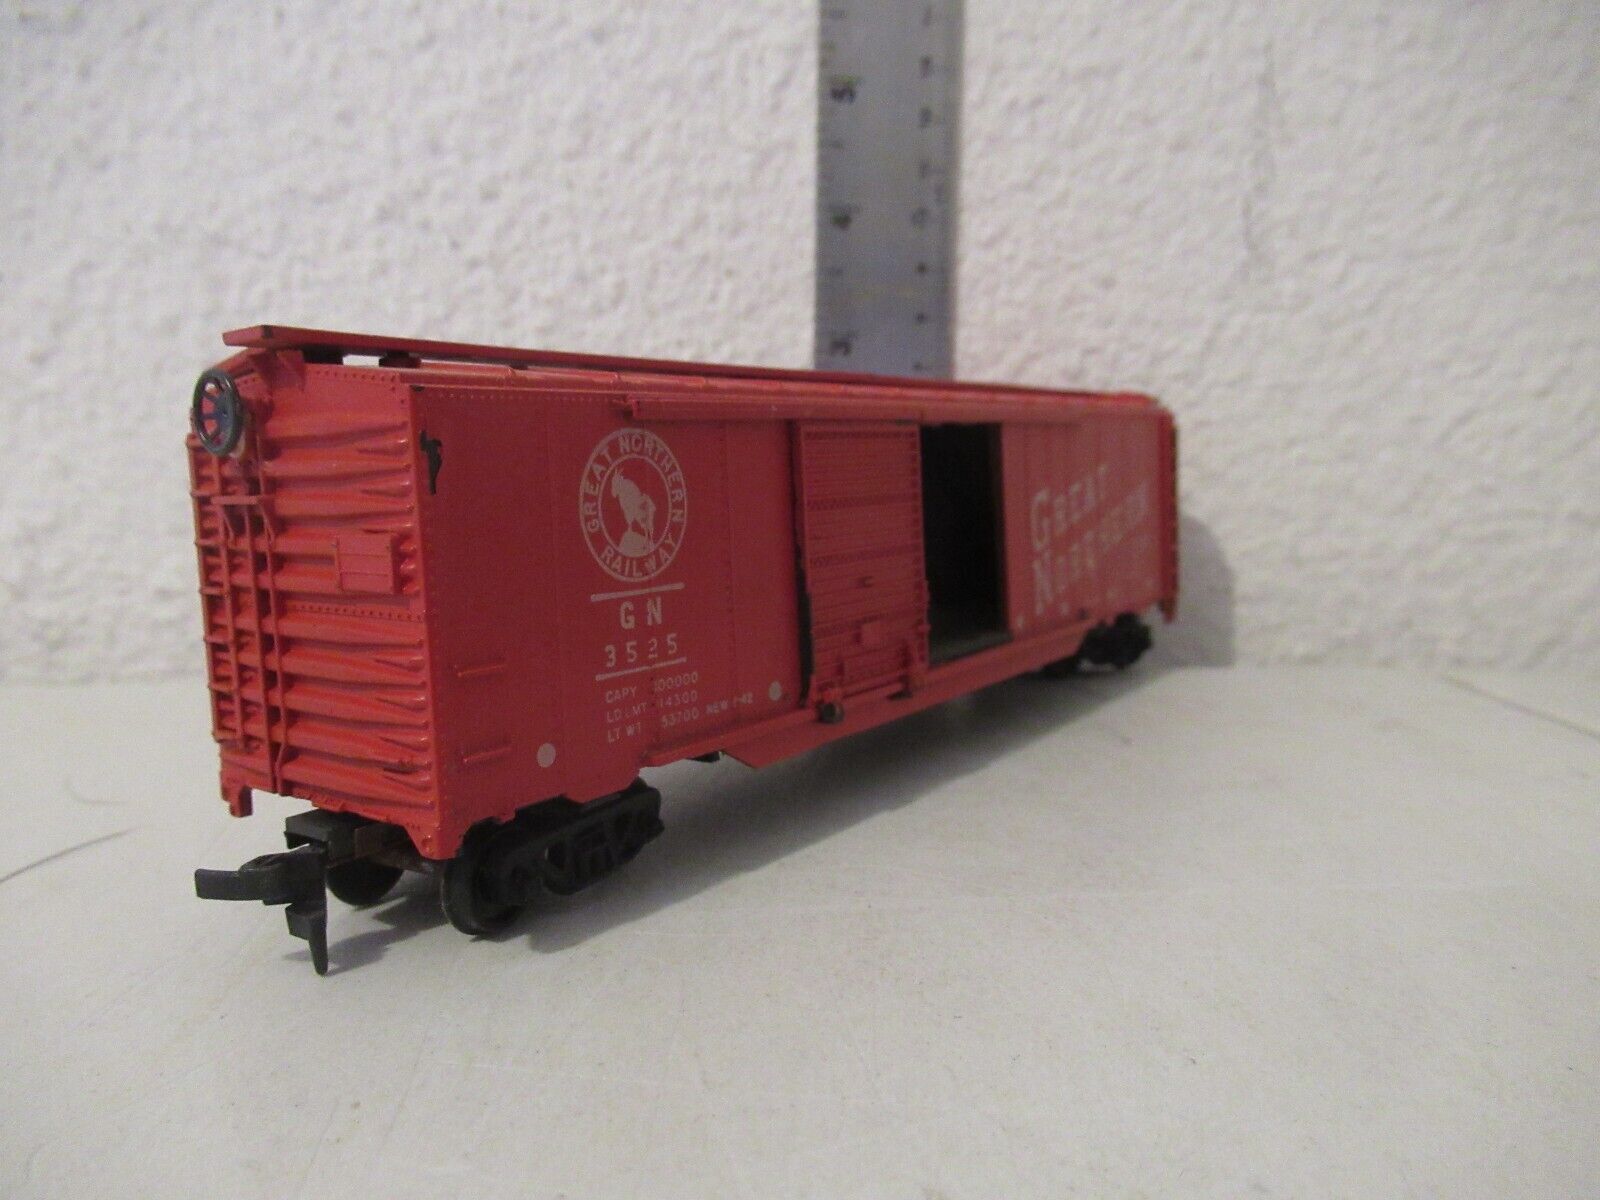 Vintage Athearn HO Scale 3525 Great Northern Box Car